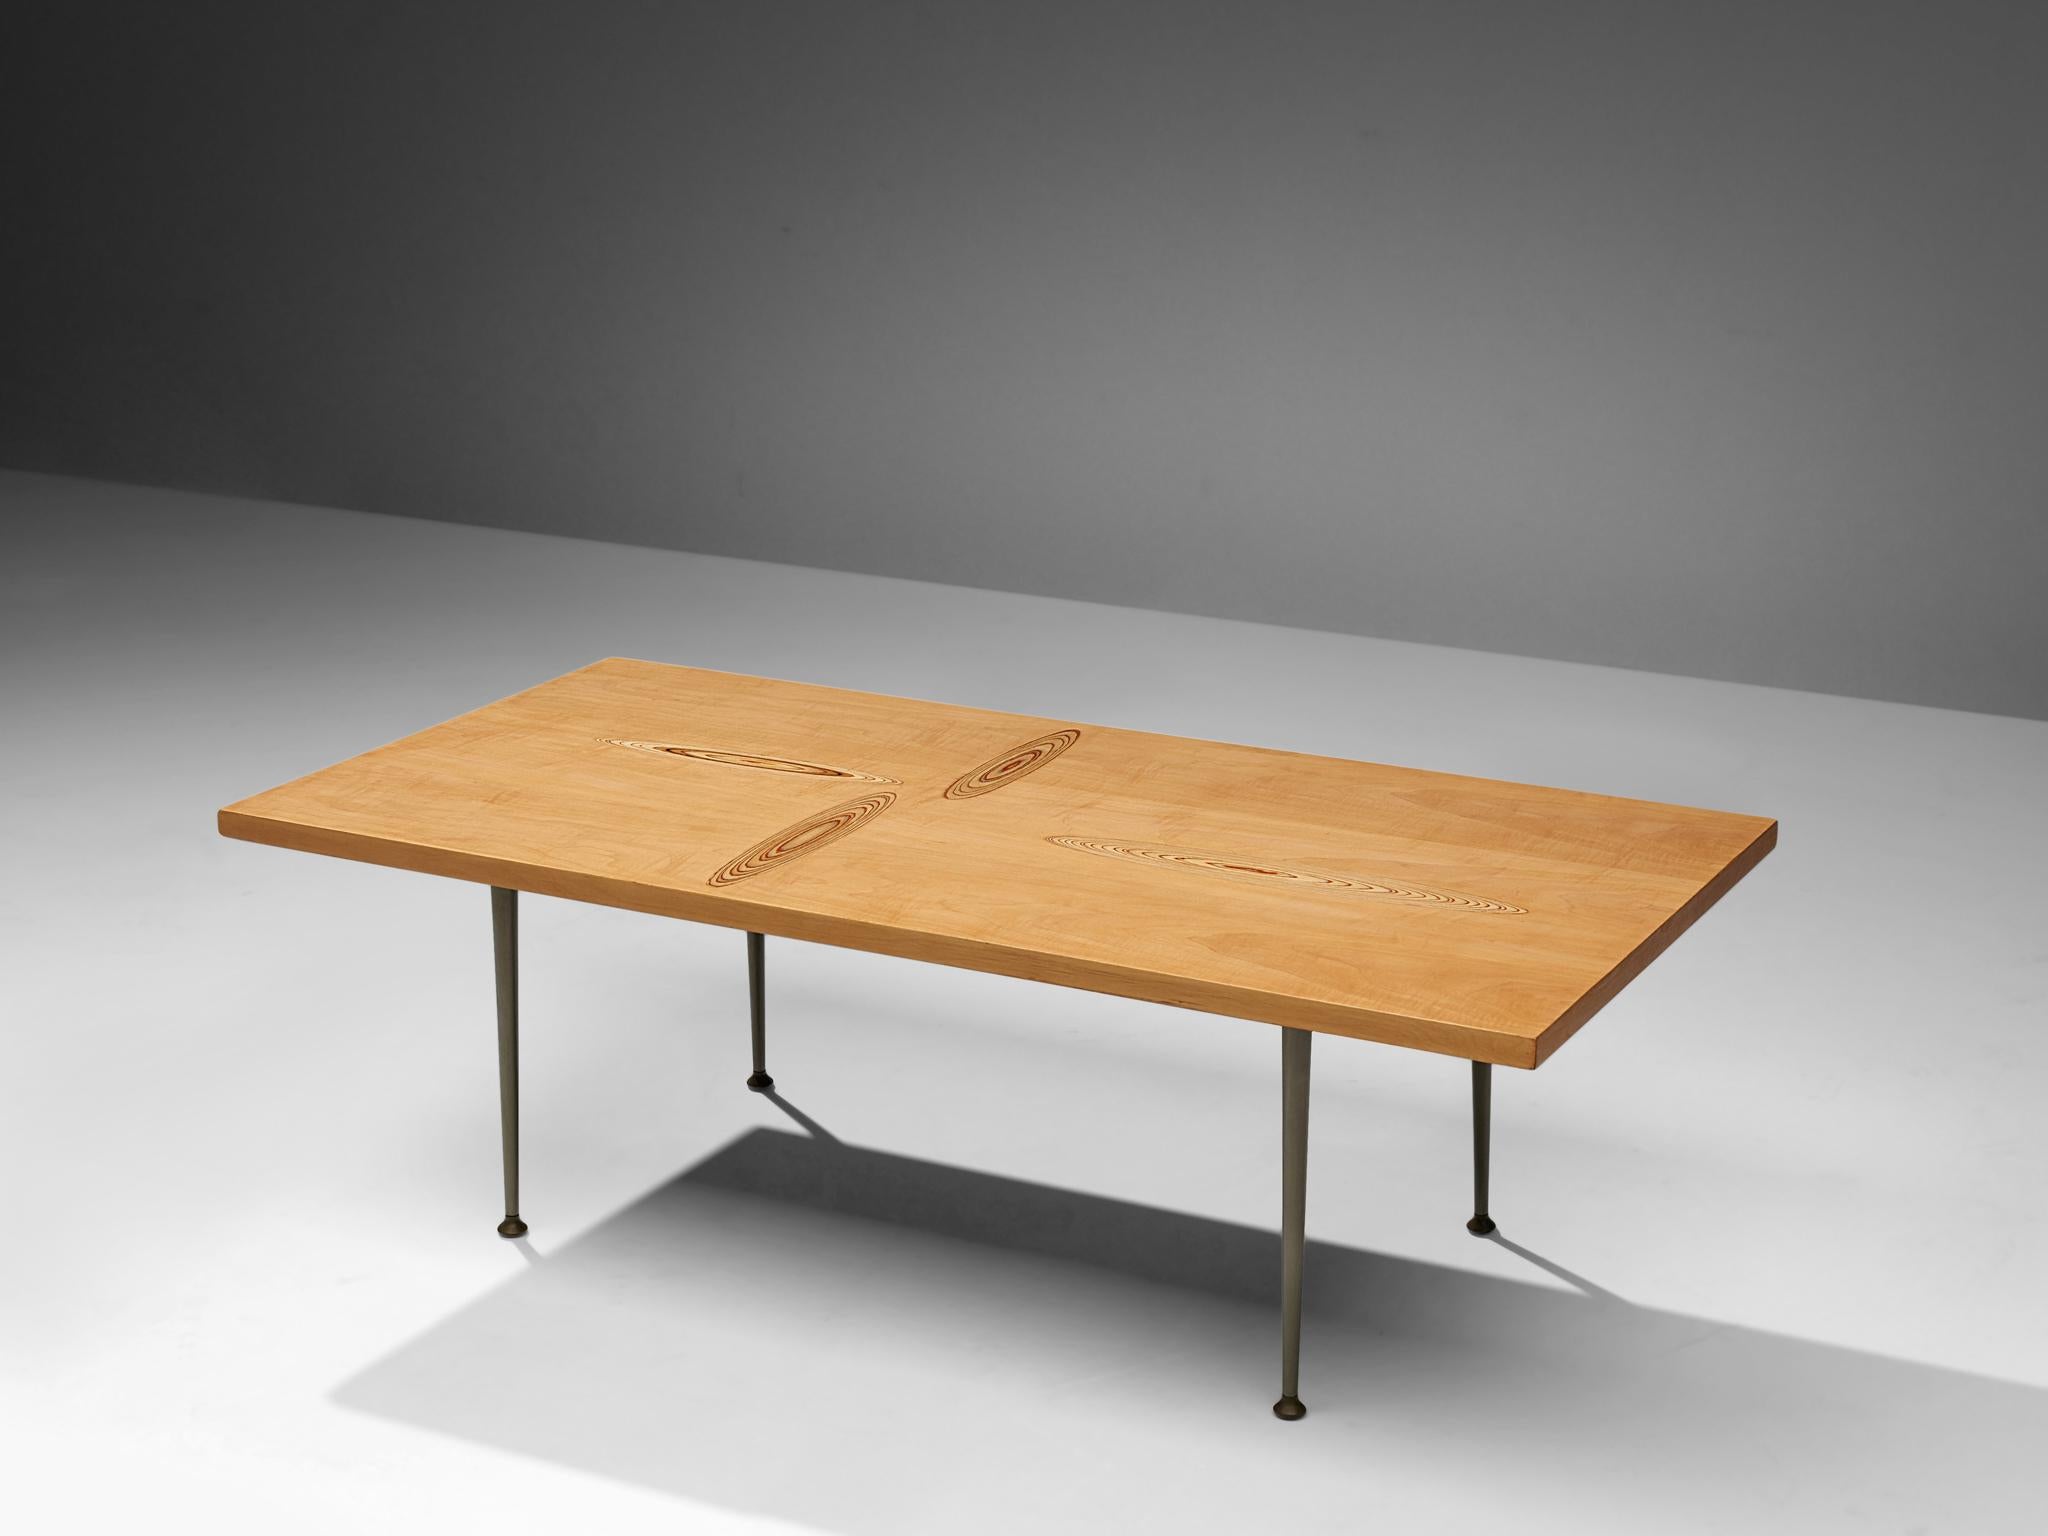 Tapio Wirkkala for Asko, coffee table, birch, metal, Finland, 1960s.

Coffee table with wooden inlay motifs designed by Tapio Wirkkala. The table is produced by Asko. This coffee table is one of Wirkkala's iconic furniture designs. Made with four